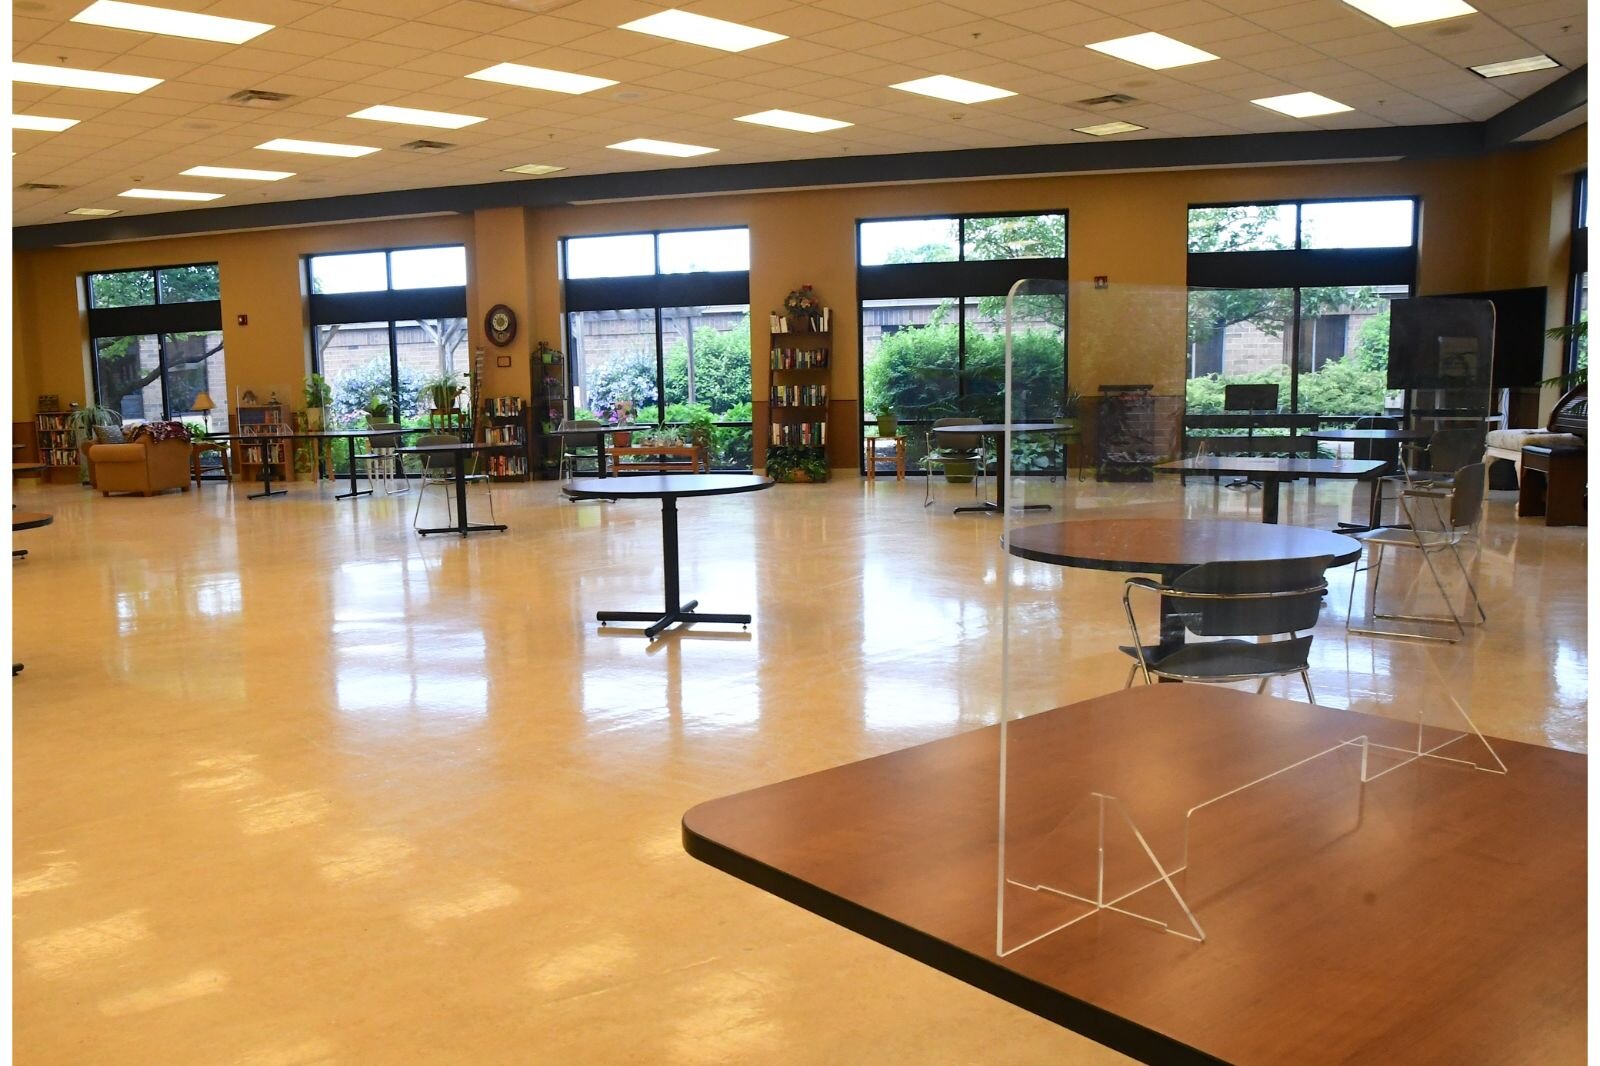 The activity room of the Calhoun County Medical Care Facility can serve for many purposes.